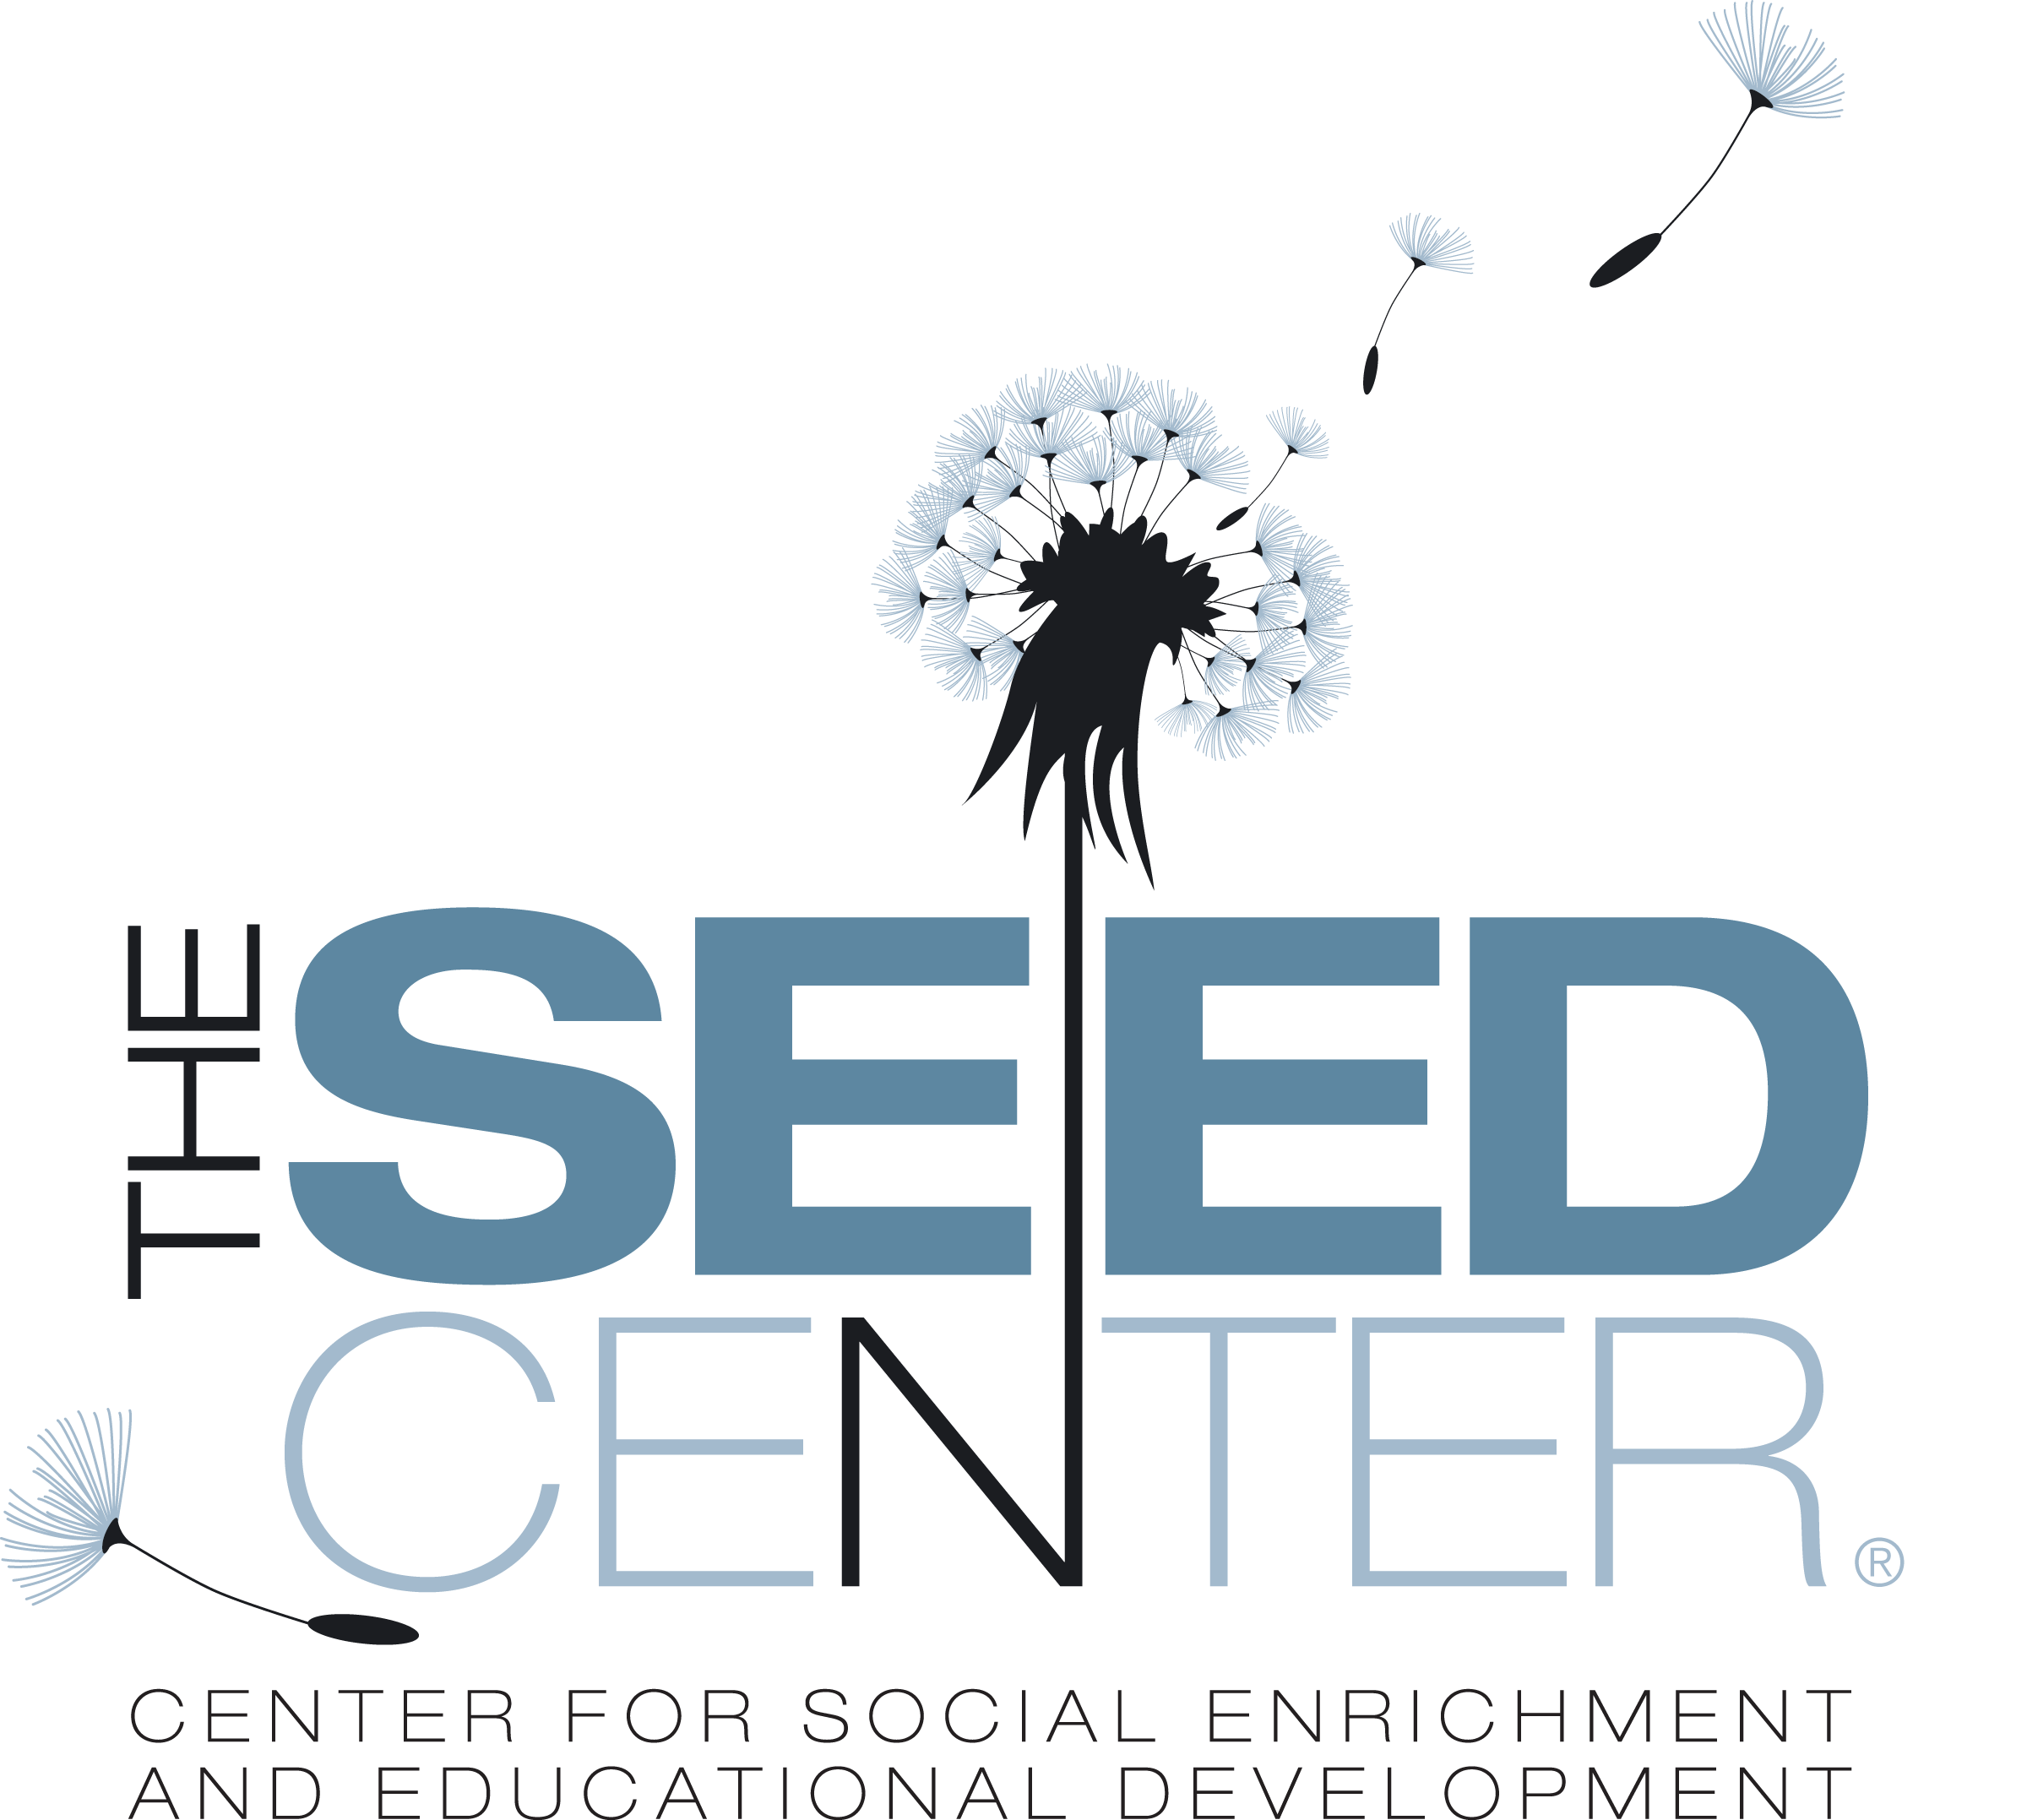 The SEED CENTER